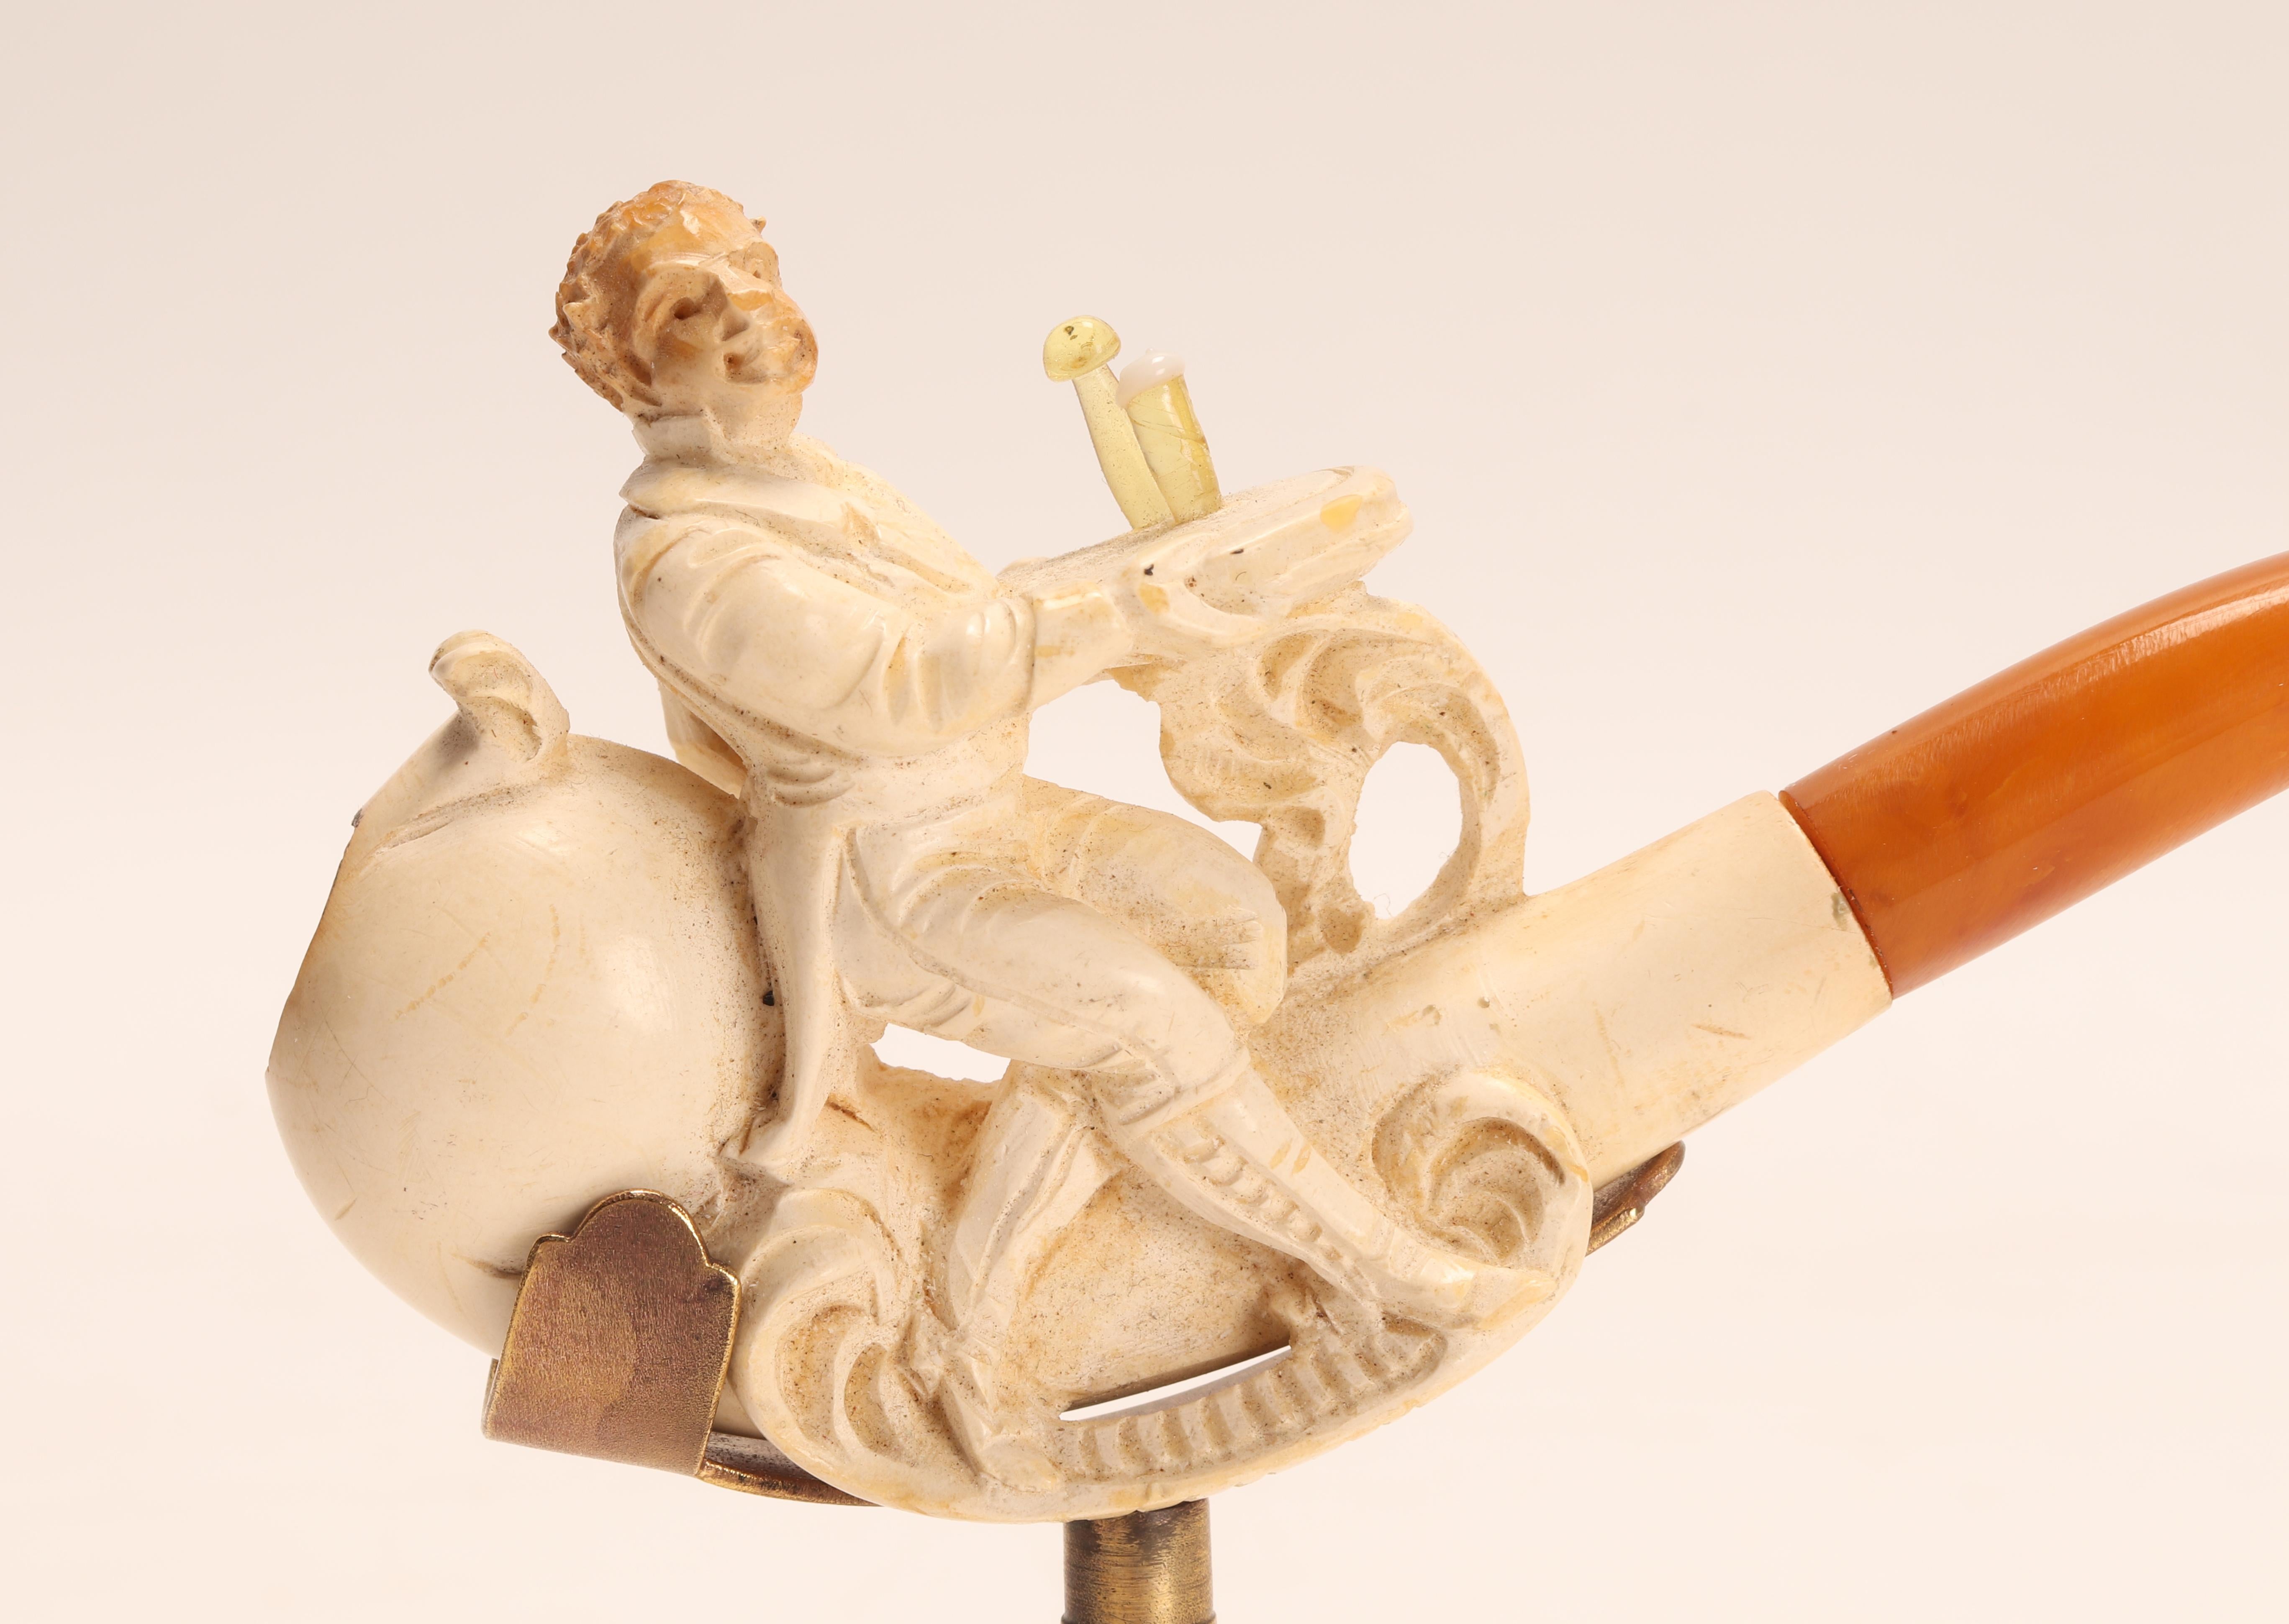 Tobacco taster pipe, made out of carved meershaum, with amber mouthpiece. A waiter with the face of a monkey, serves in a tray, a bottle and a mug of beer, made of amber. Original case. Vienna, Austria circa 1880. (The stand is for photographic use